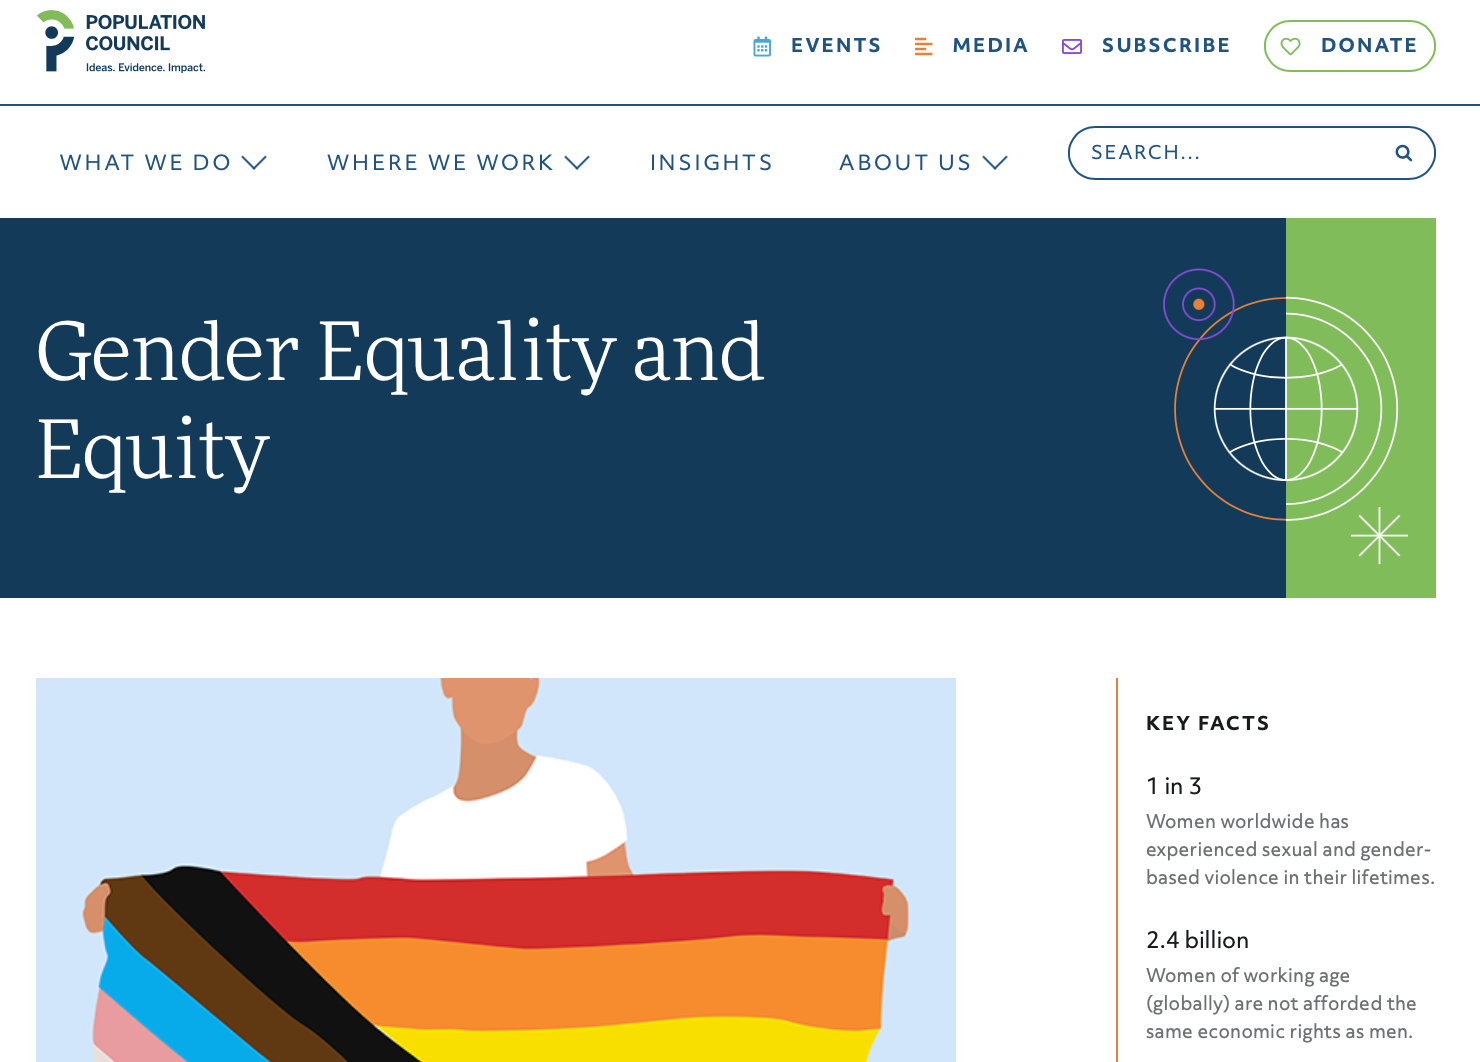 Screenshot of Population Council's Gender Equality and Equity page